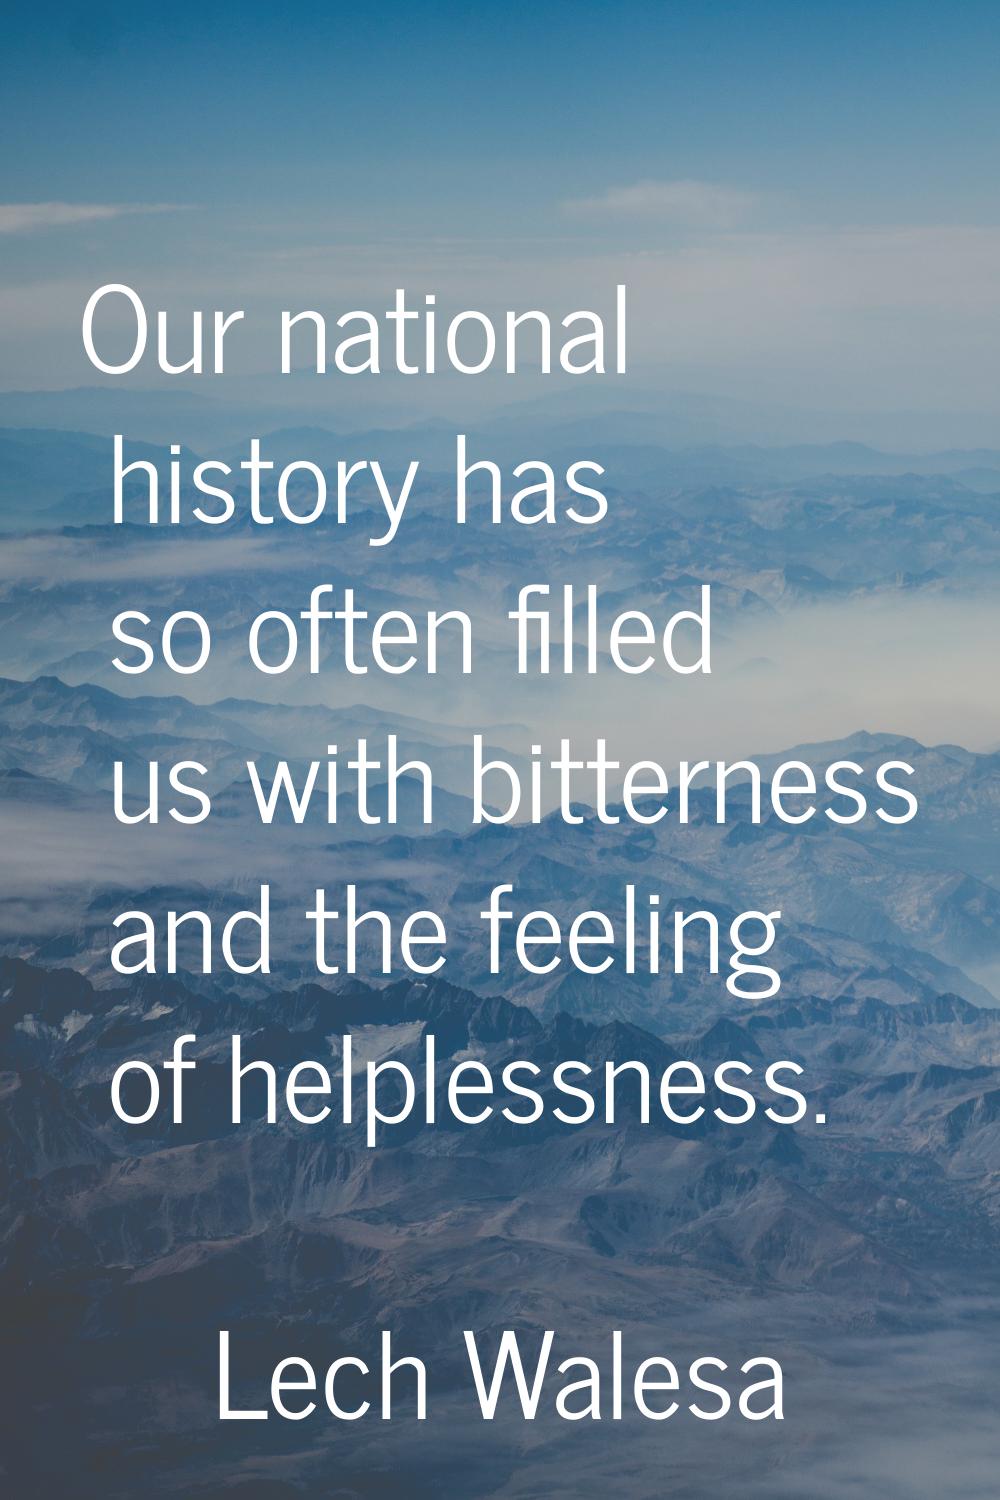 Our national history has so often filled us with bitterness and the feeling of helplessness.